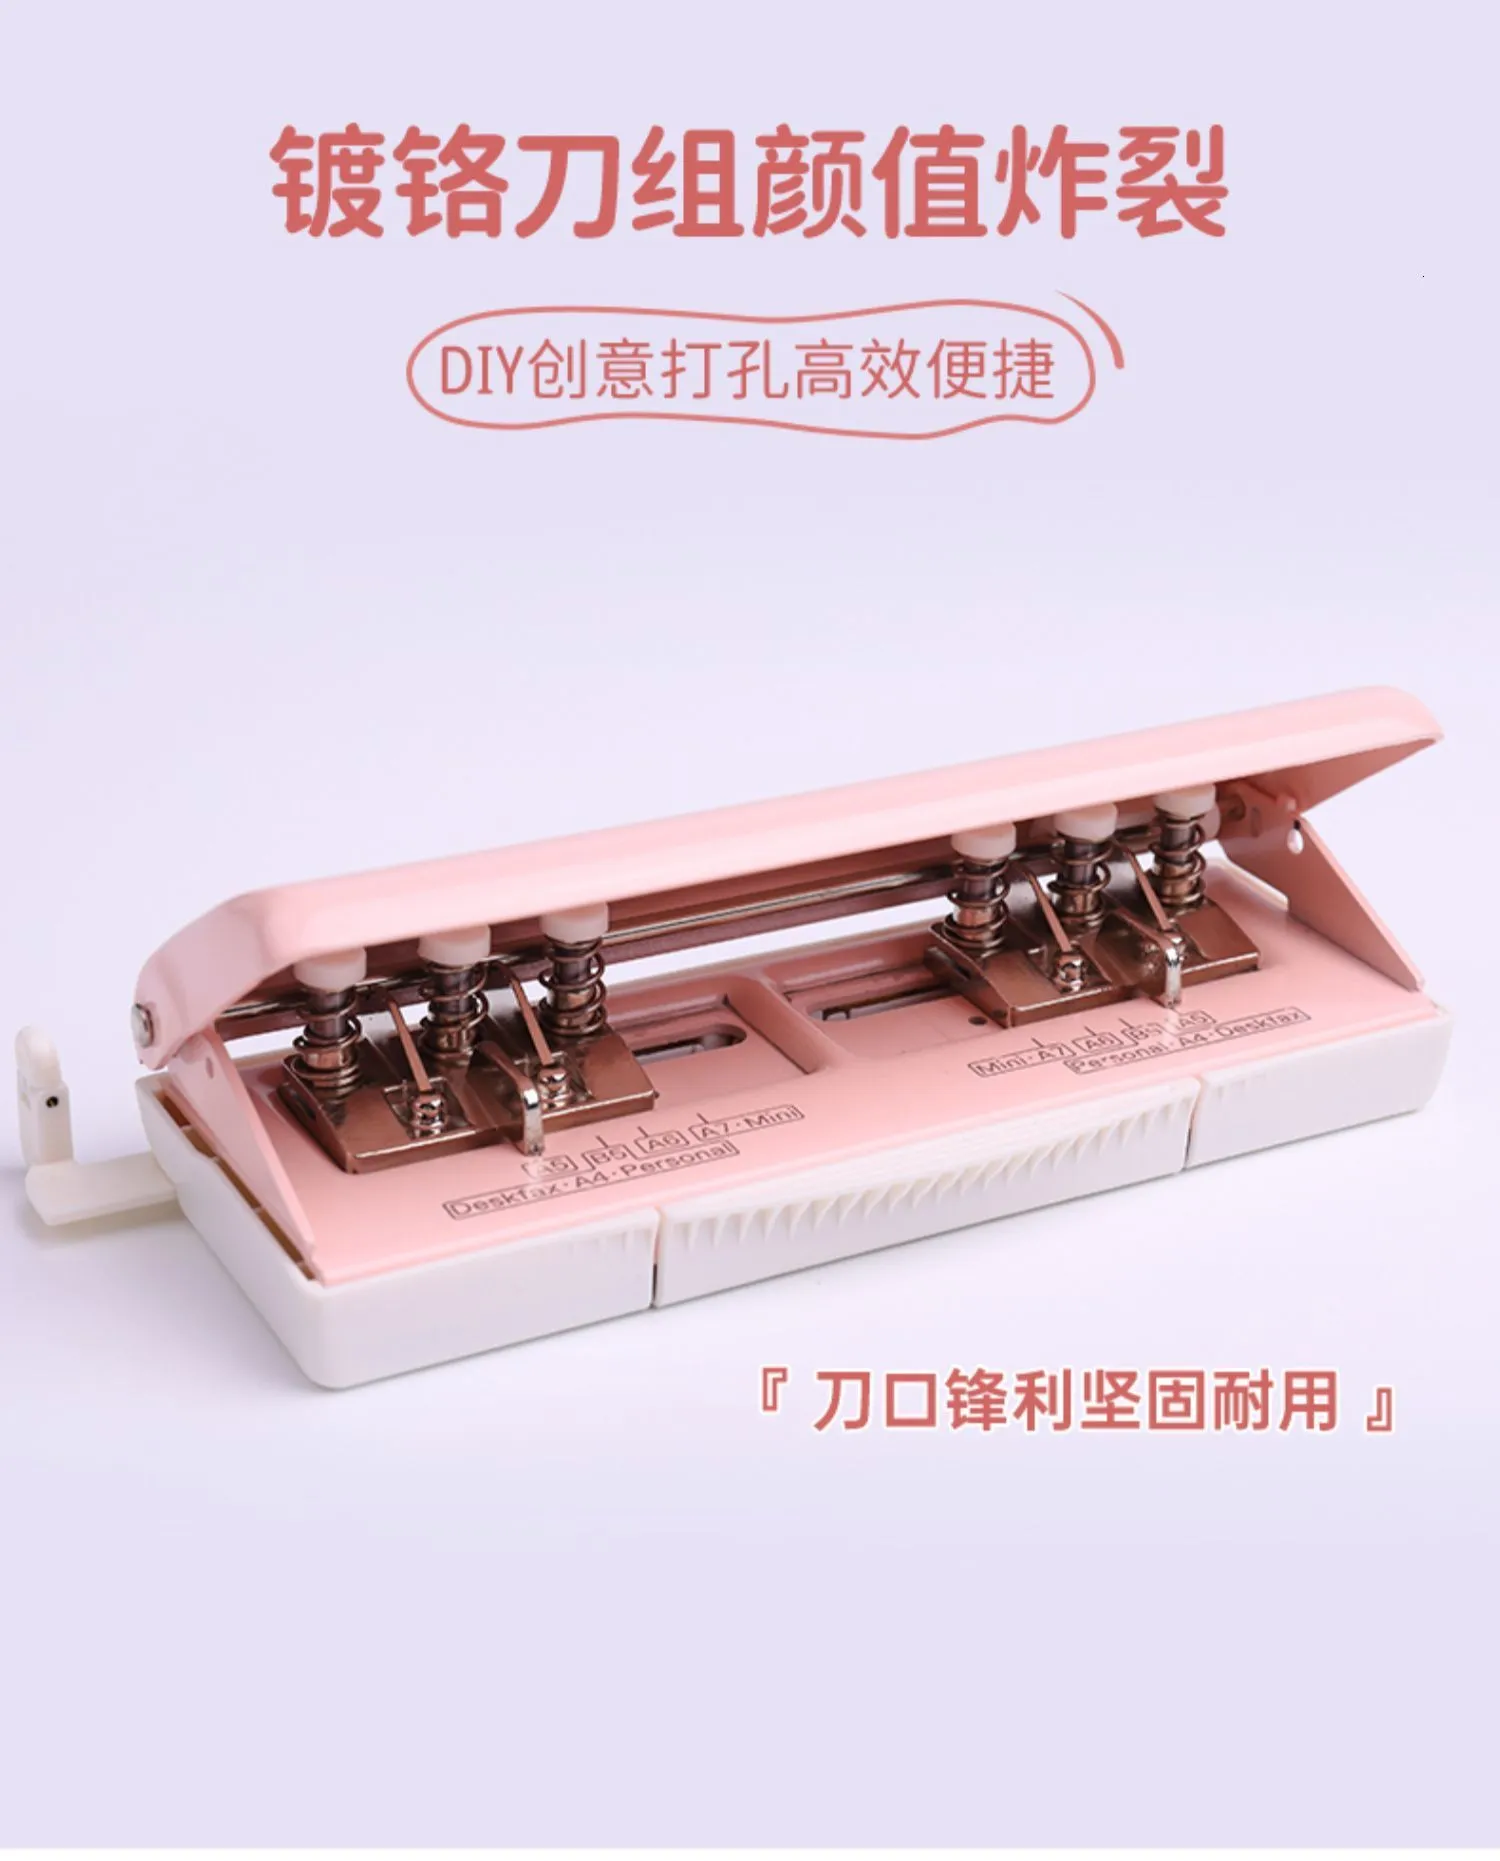 Adjustable 6 Hole Punching Machine For DIY Paper And Notebook Binding Ideal  For Home Climate Controlled Storage And Organization Compatible With A4, A5,  A6, And A7 Scrapbook Scissors Model 9173 From Yujia10